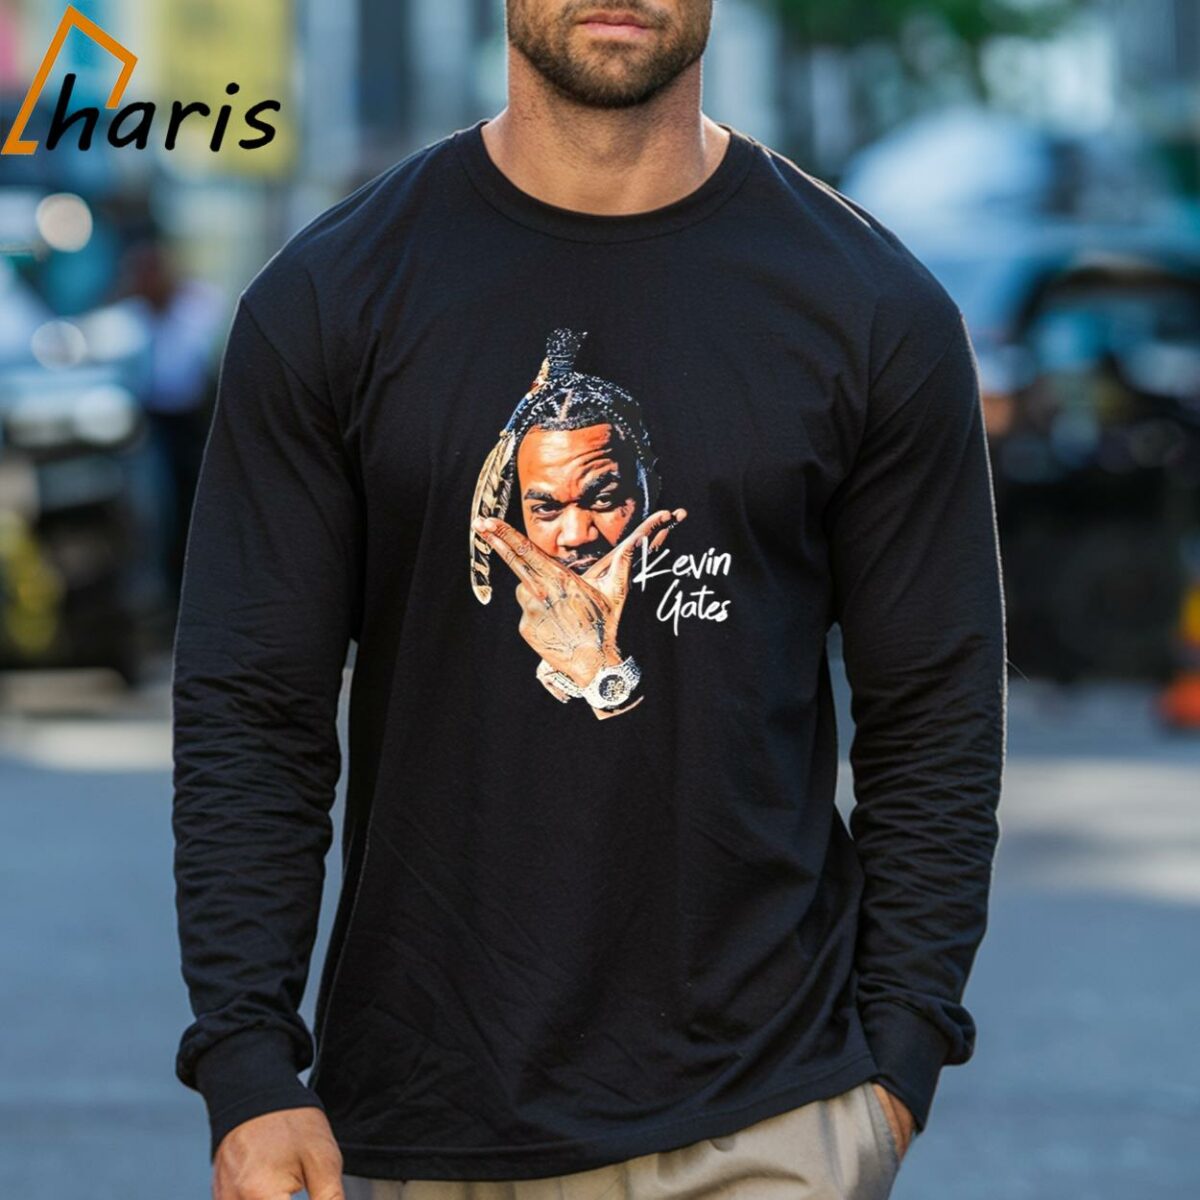 Kevin Gates American Rapper And Singer Graphic Shirt 3 Long sleeve shirt